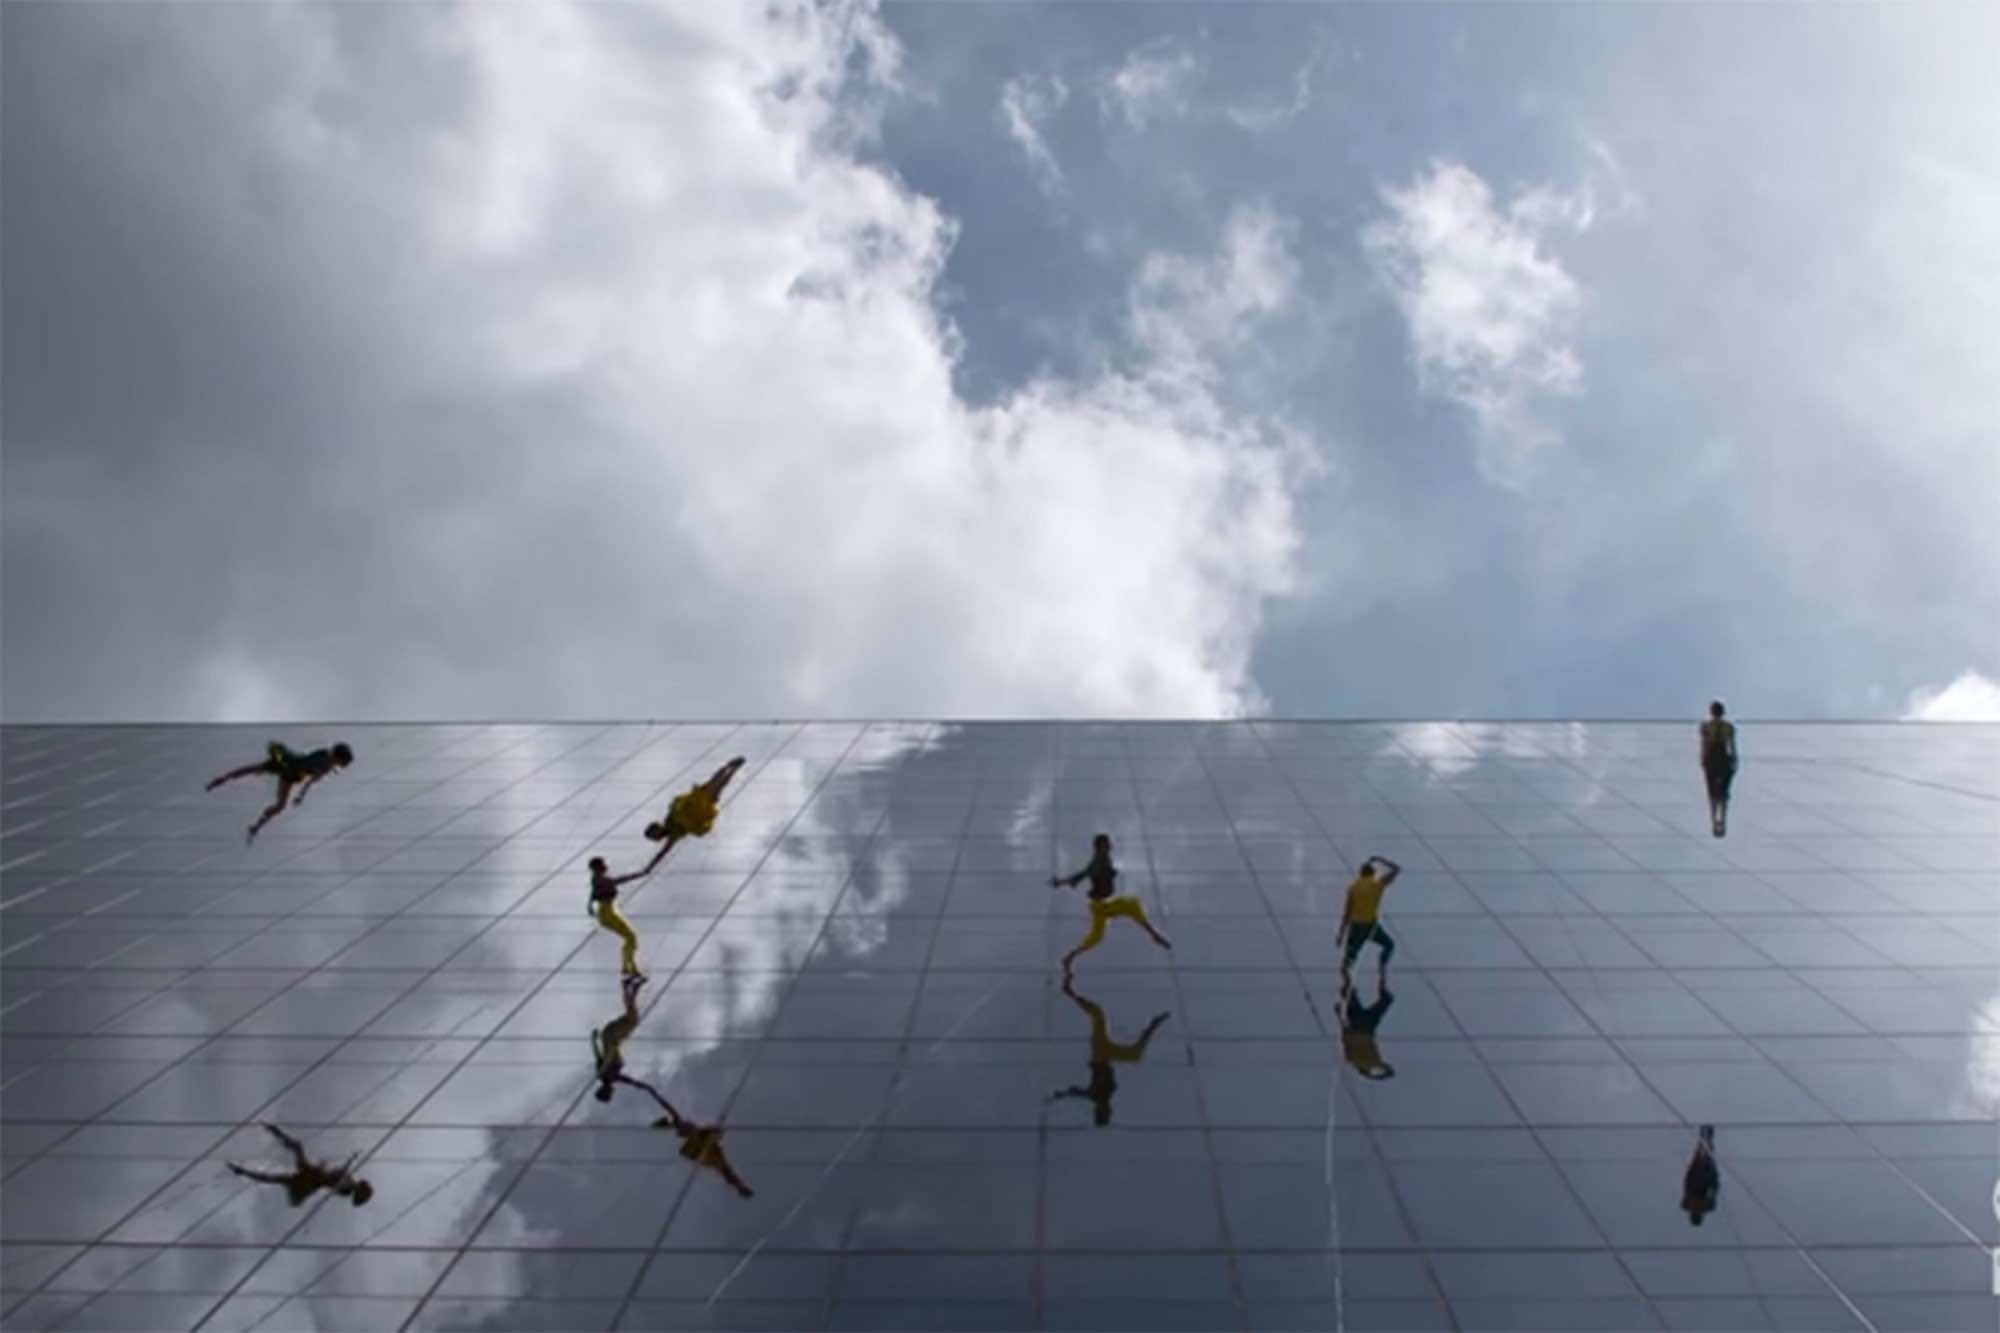 This Gravity Defying Video Of People Dancing On A Building Will Probably Give You Vertigo_Image 0